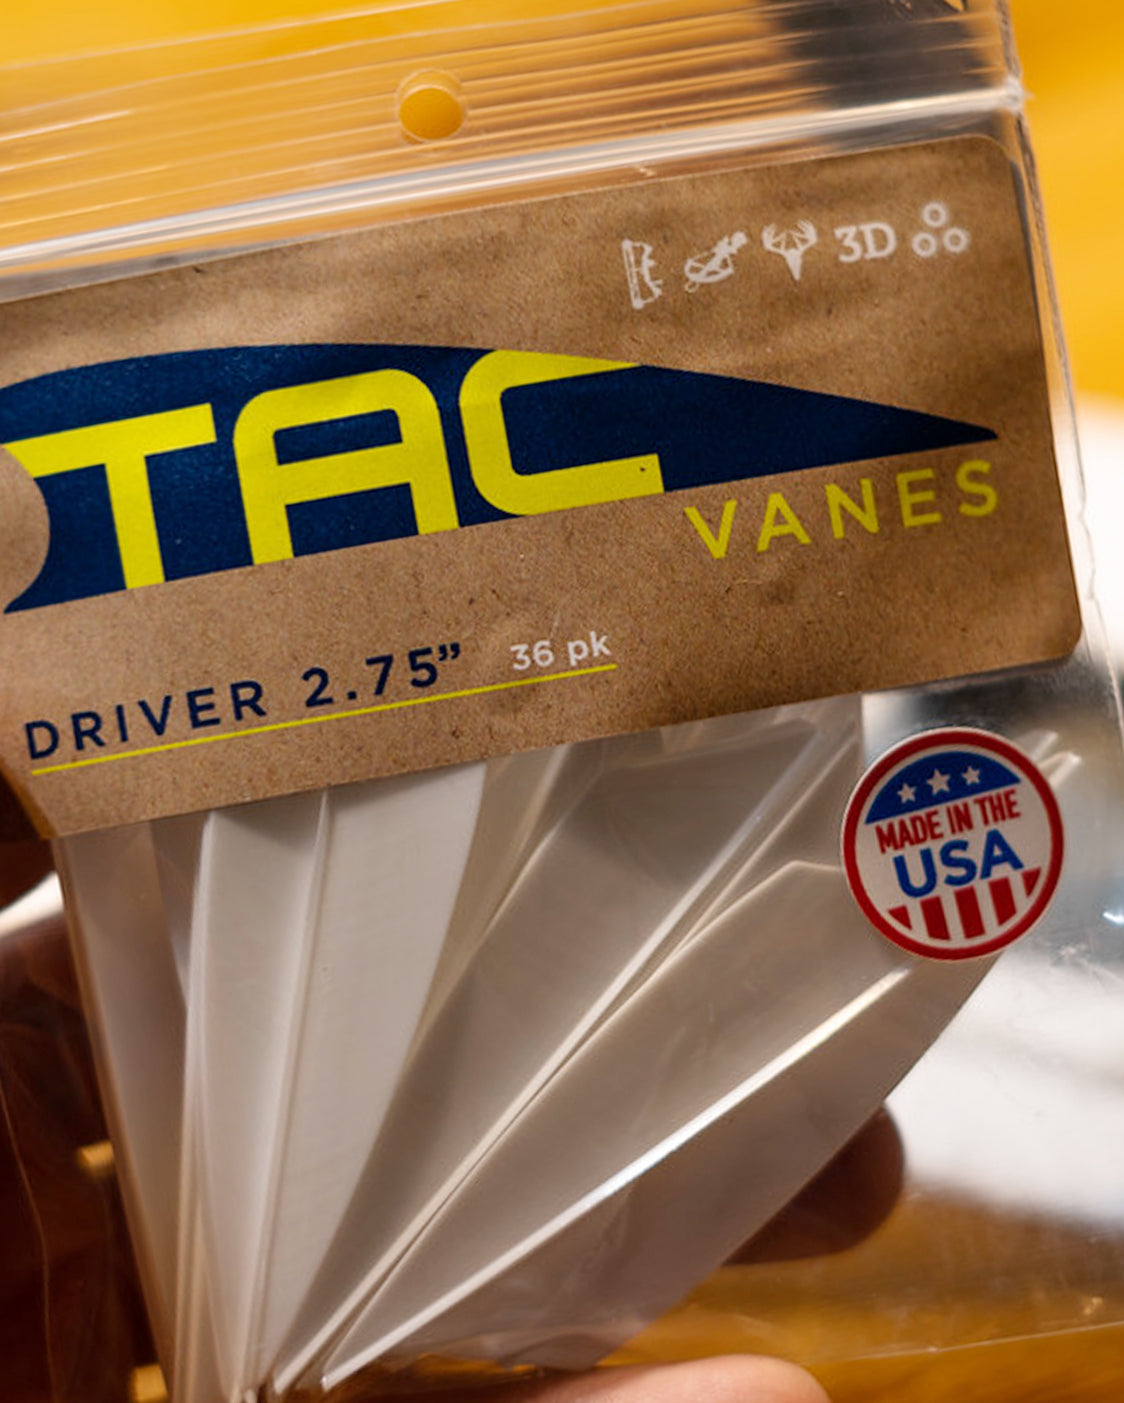 tac vanes made in the USA